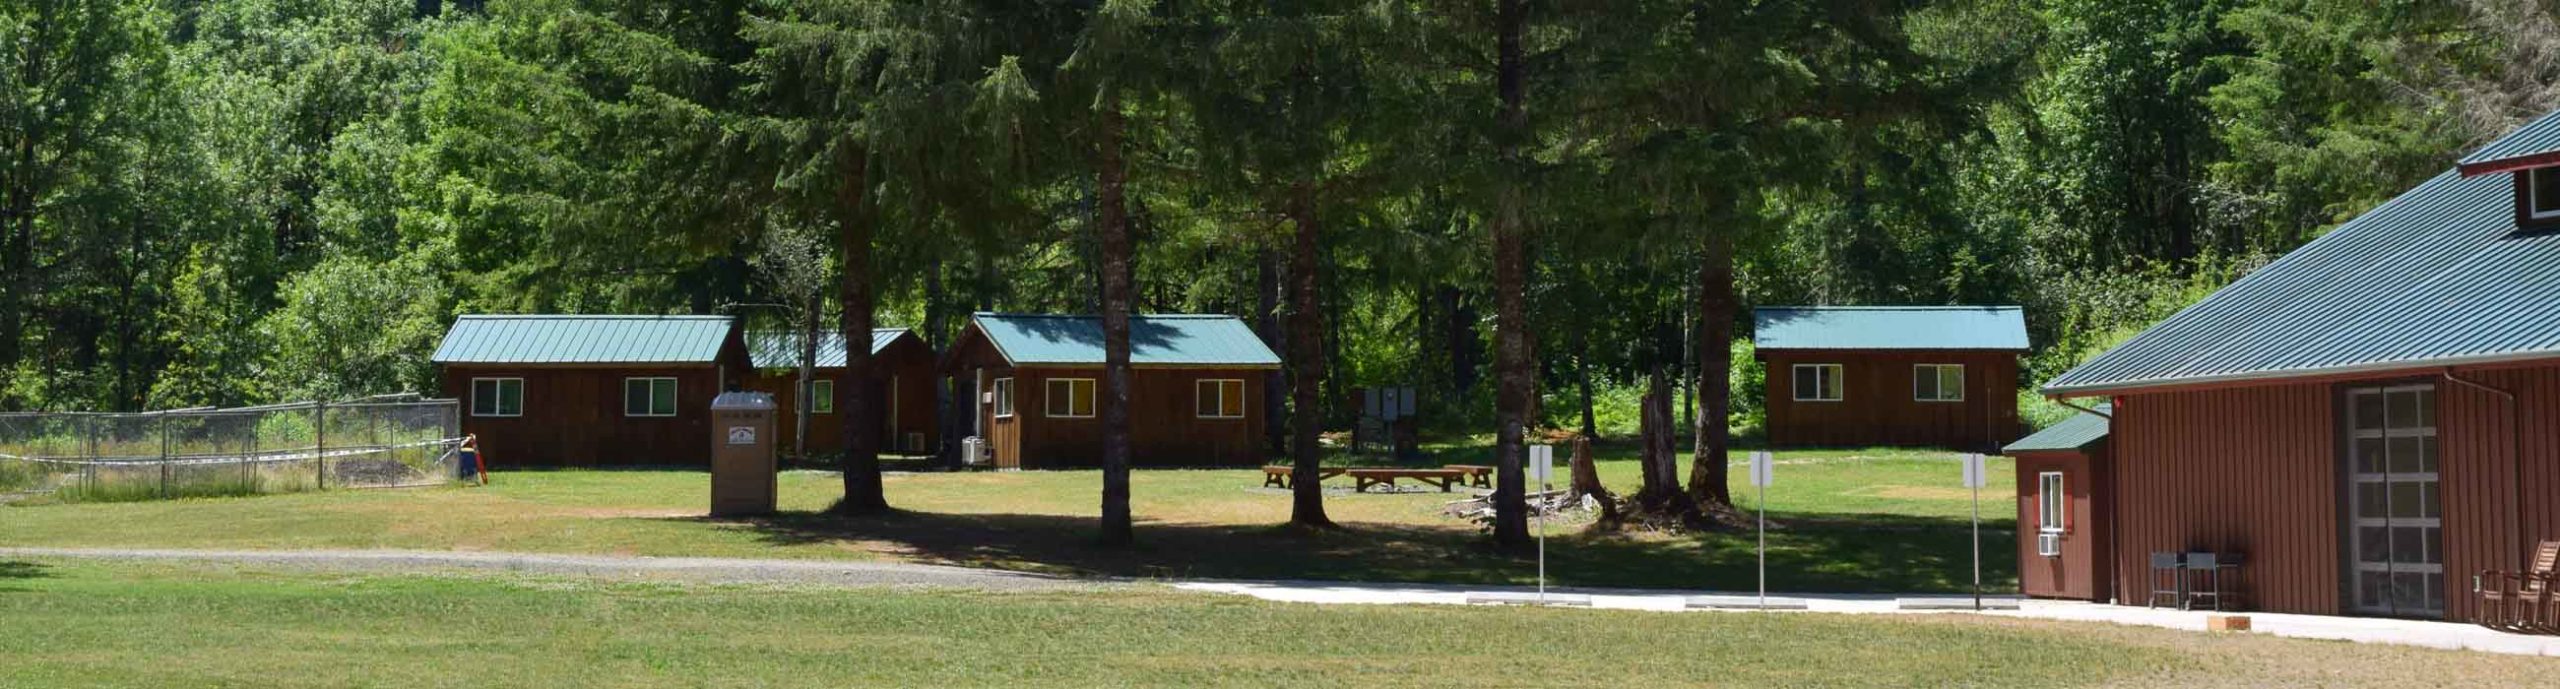 The back field of Camp Lutherwood Oregon with the dining hall in the foreground and upper cabins in the background